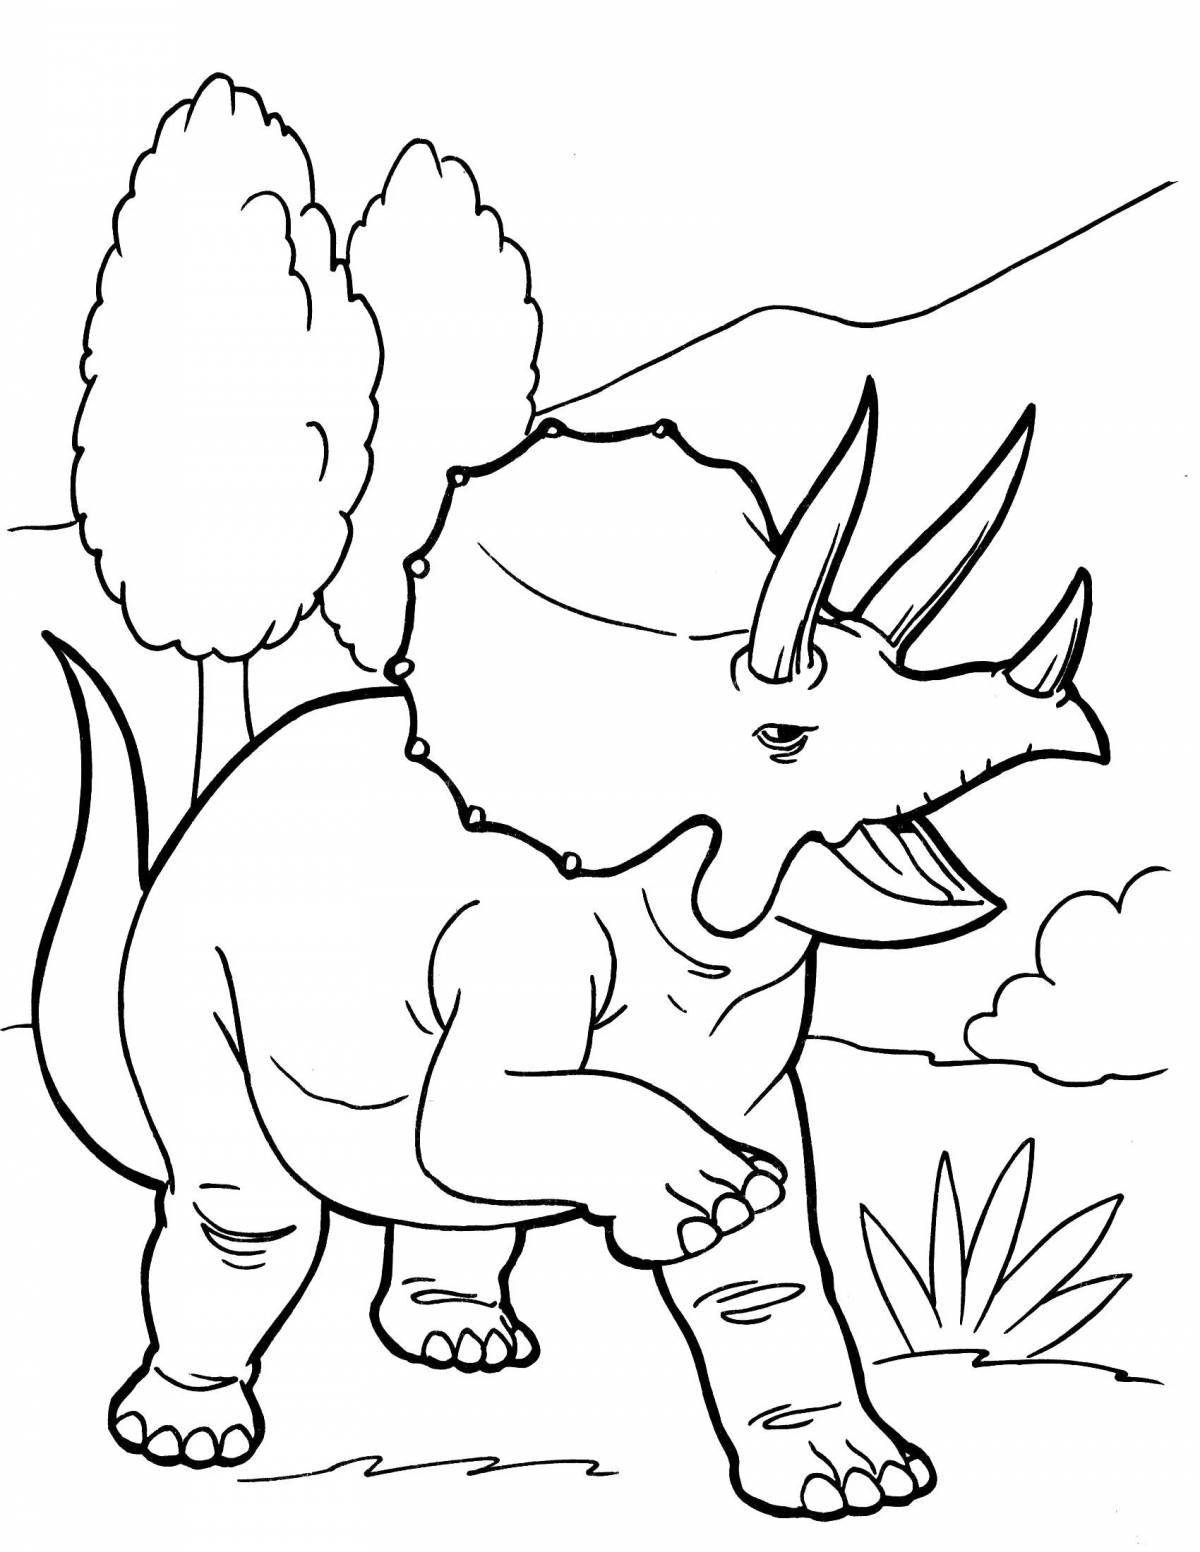 Coloring book funny triceratops